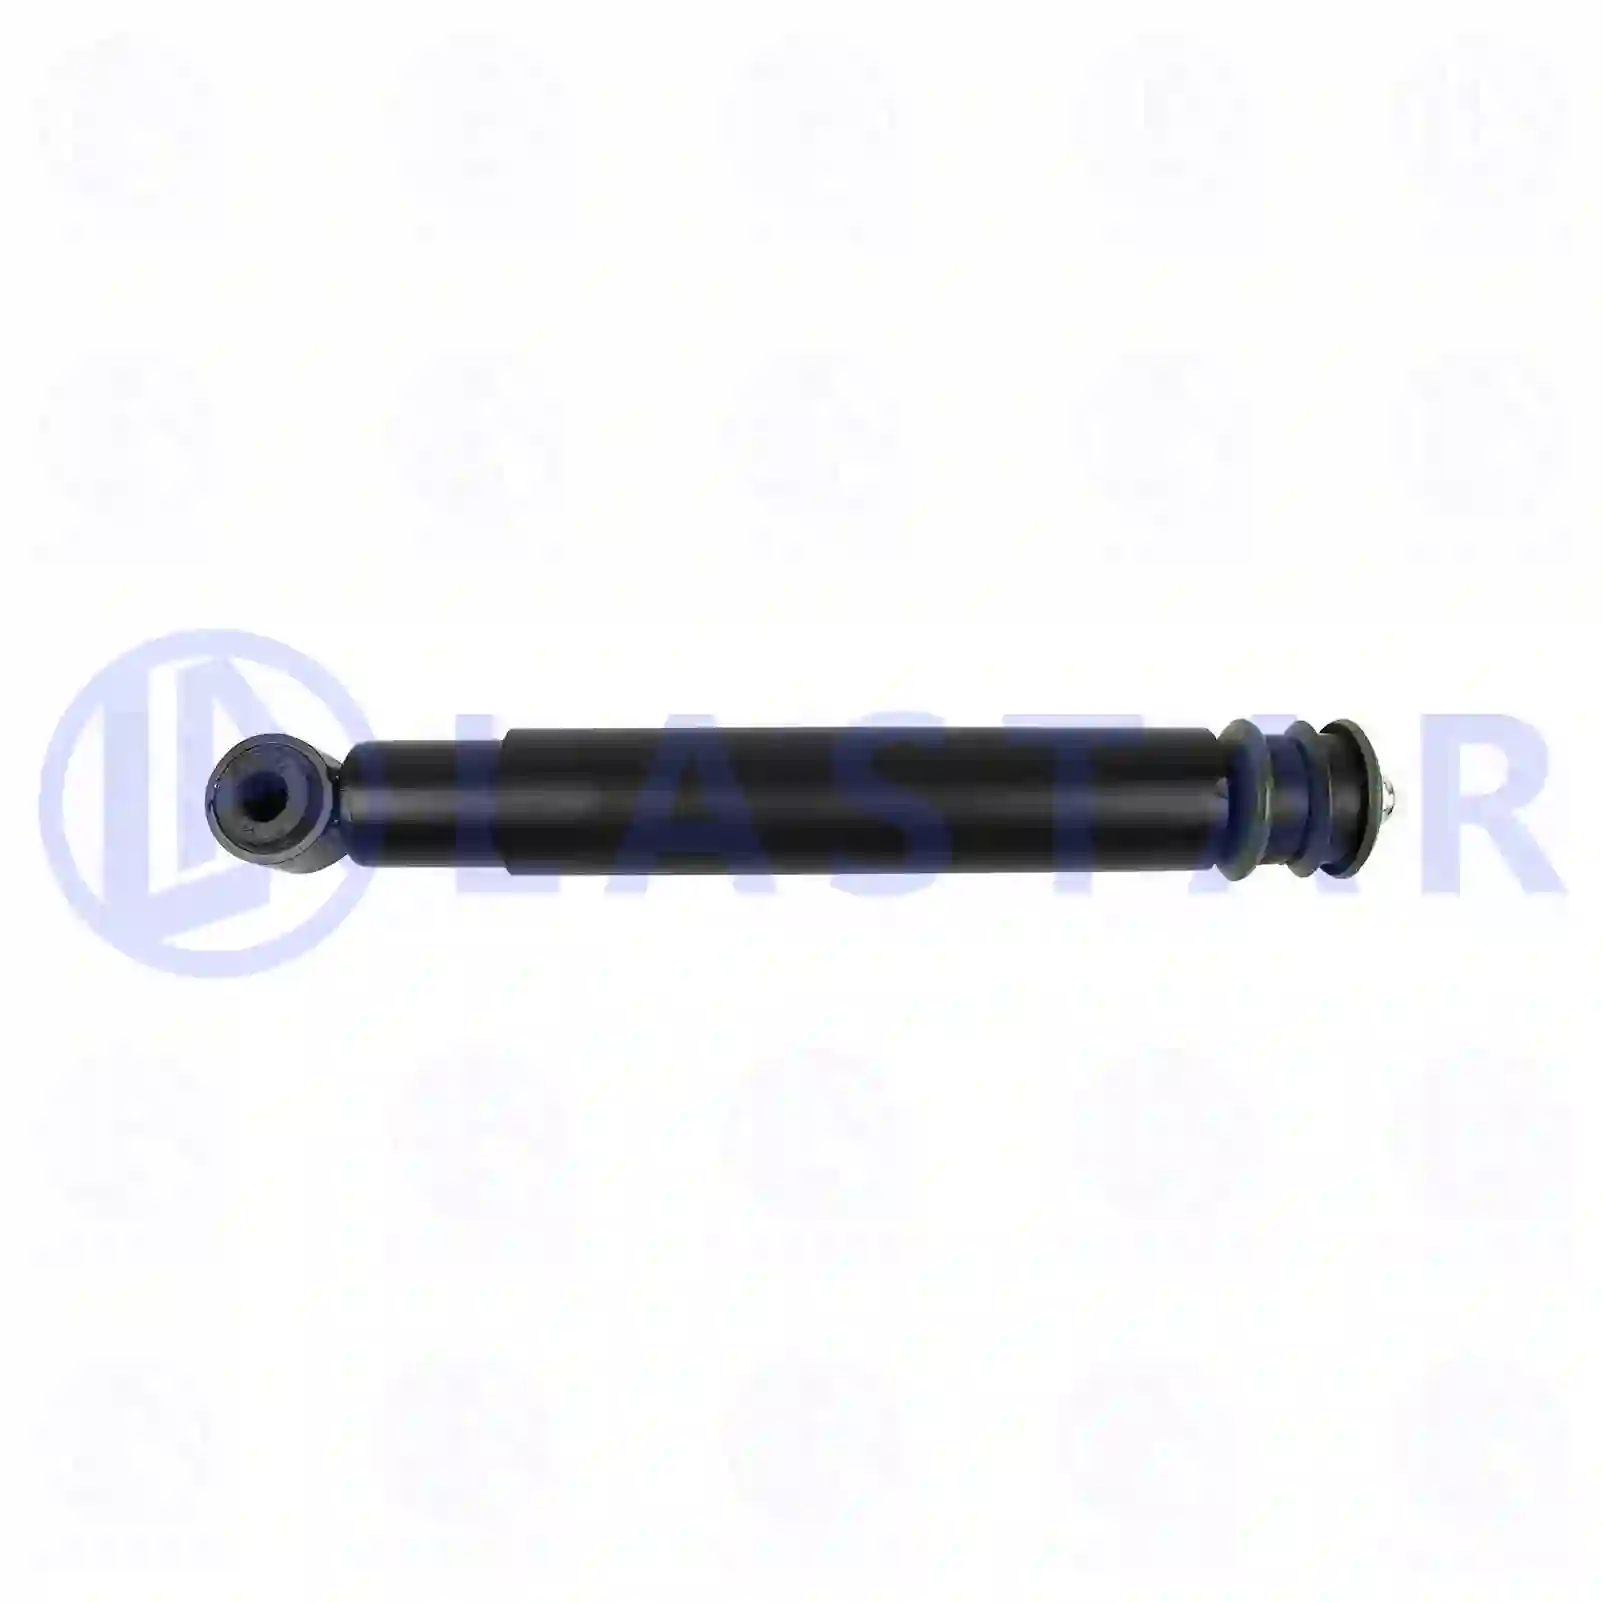 Shock absorber, 77727570, 1110588, 1111056, 395063, 1110588, 1111056, 1345500, ||  77727570 Lastar Spare Part | Truck Spare Parts, Auotomotive Spare Parts Shock absorber, 77727570, 1110588, 1111056, 395063, 1110588, 1111056, 1345500, ||  77727570 Lastar Spare Part | Truck Spare Parts, Auotomotive Spare Parts